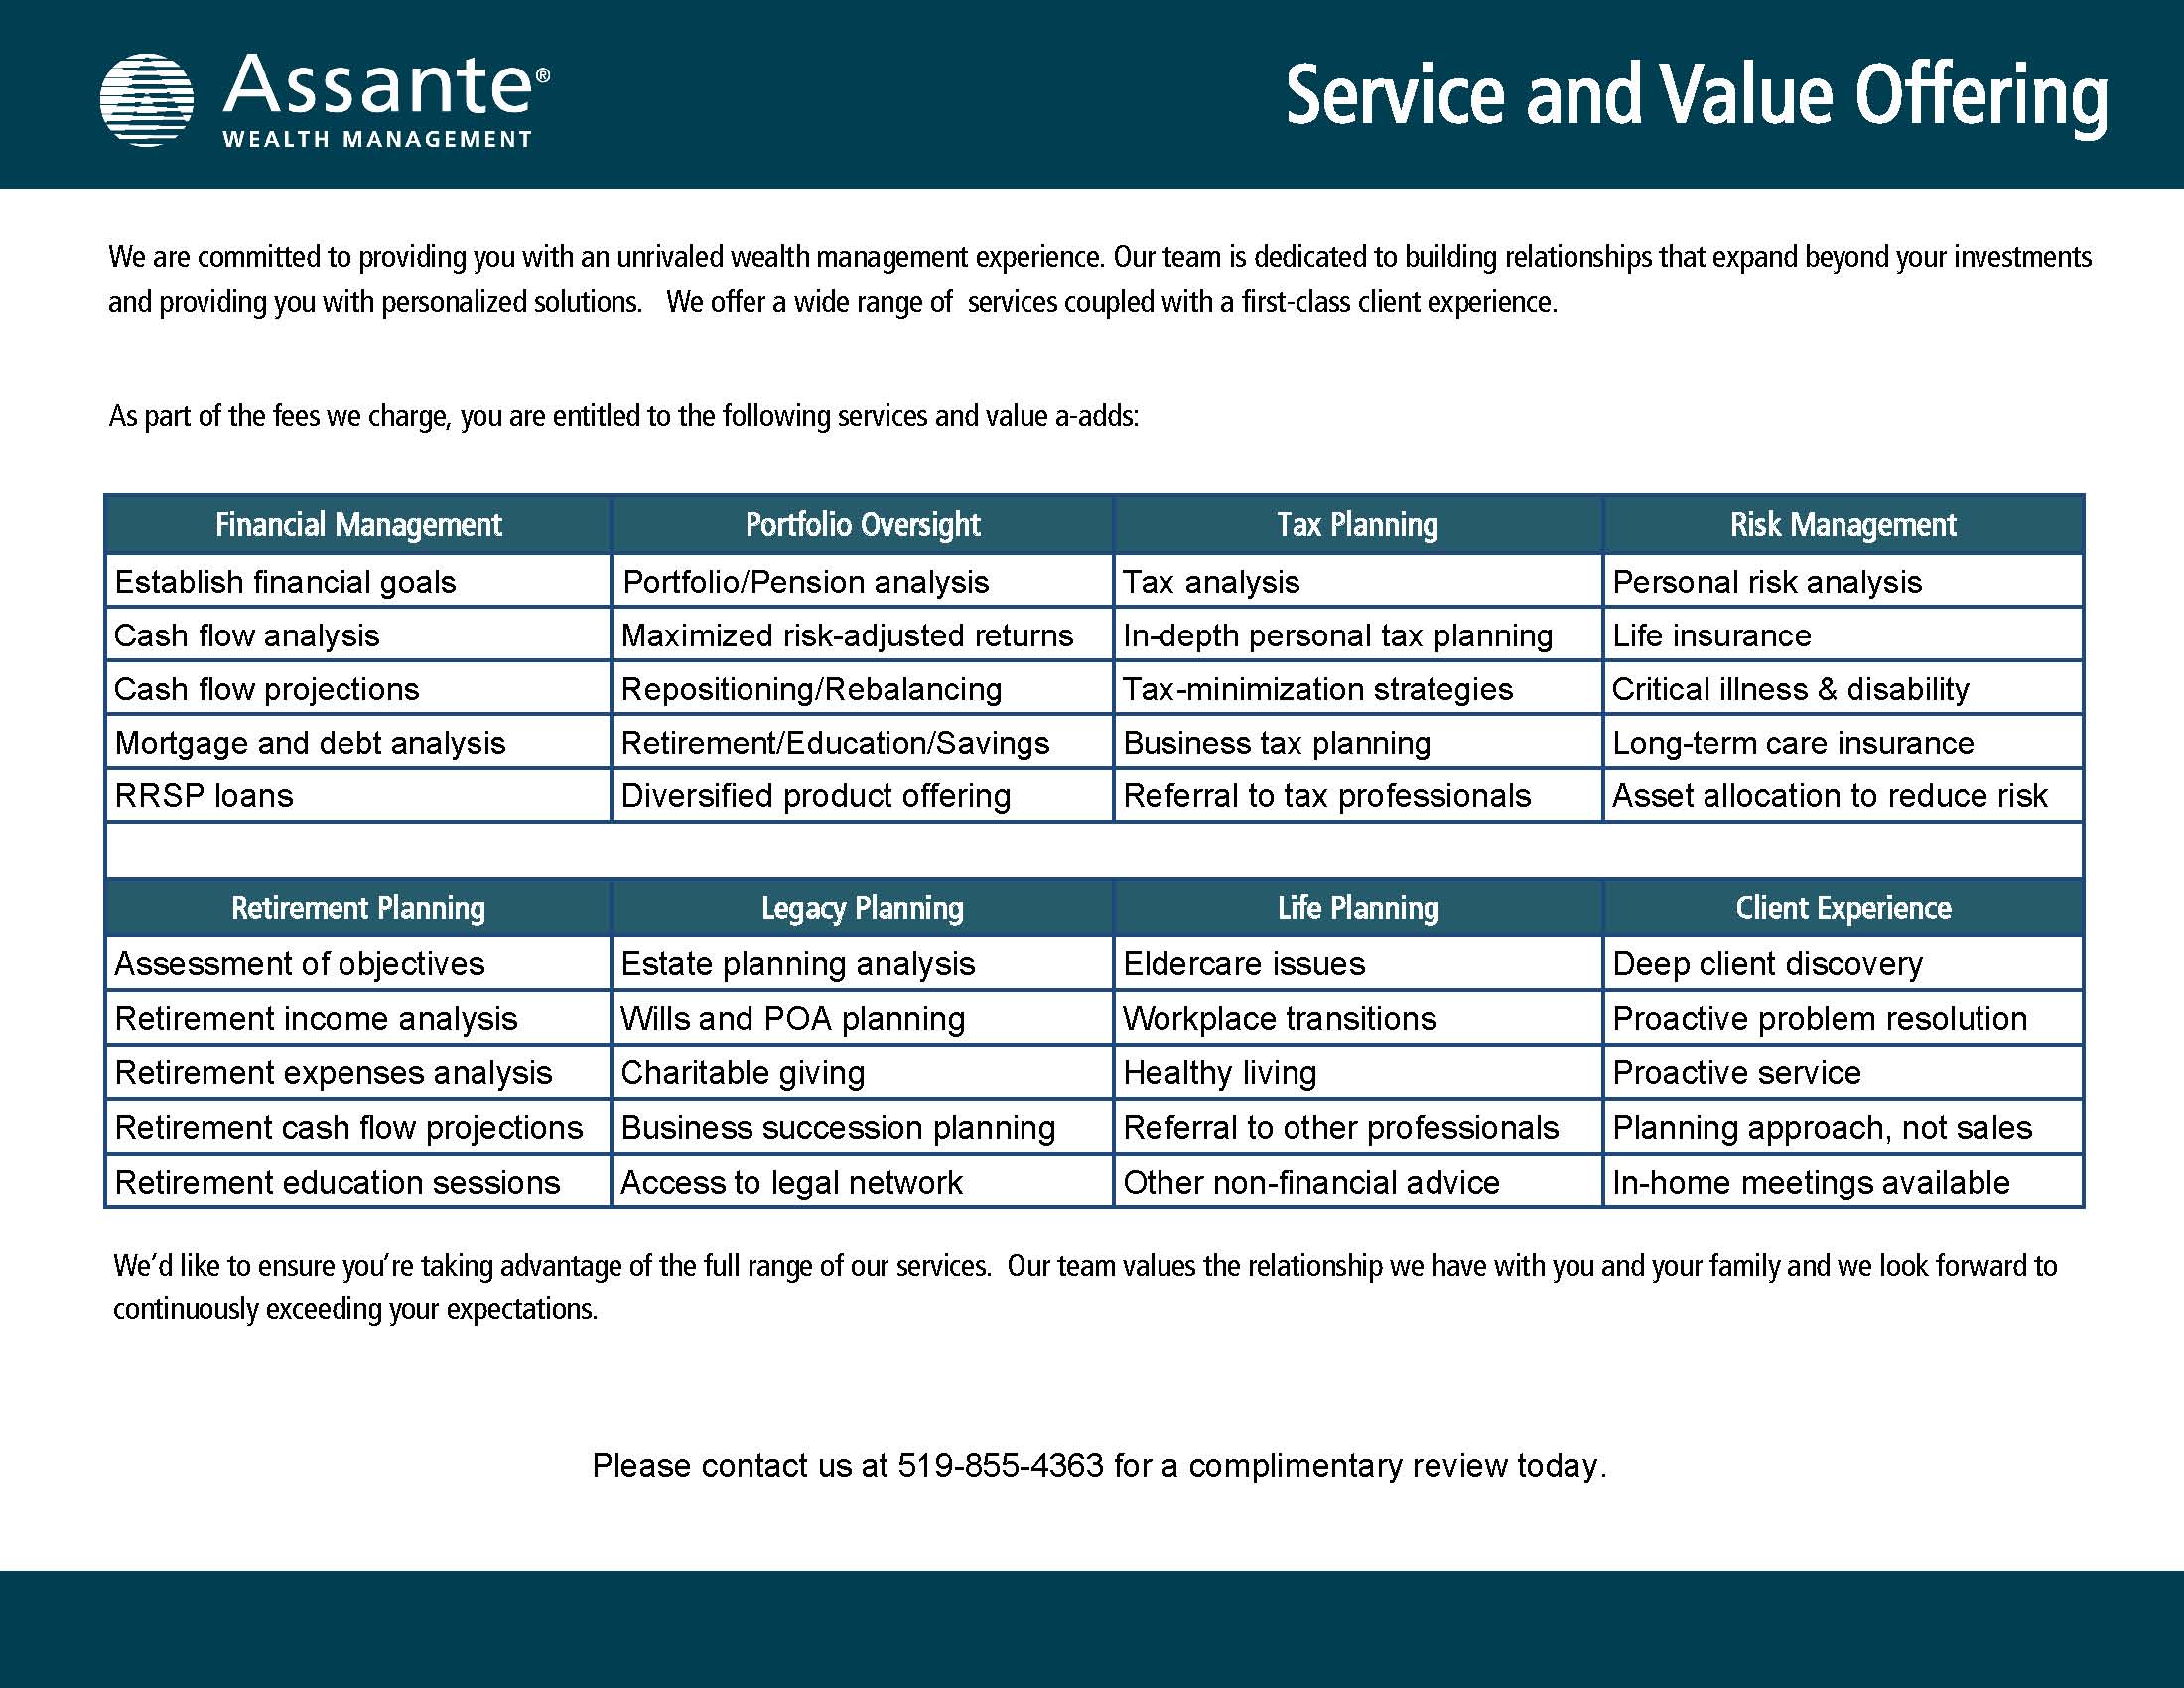 Service and Value Offering